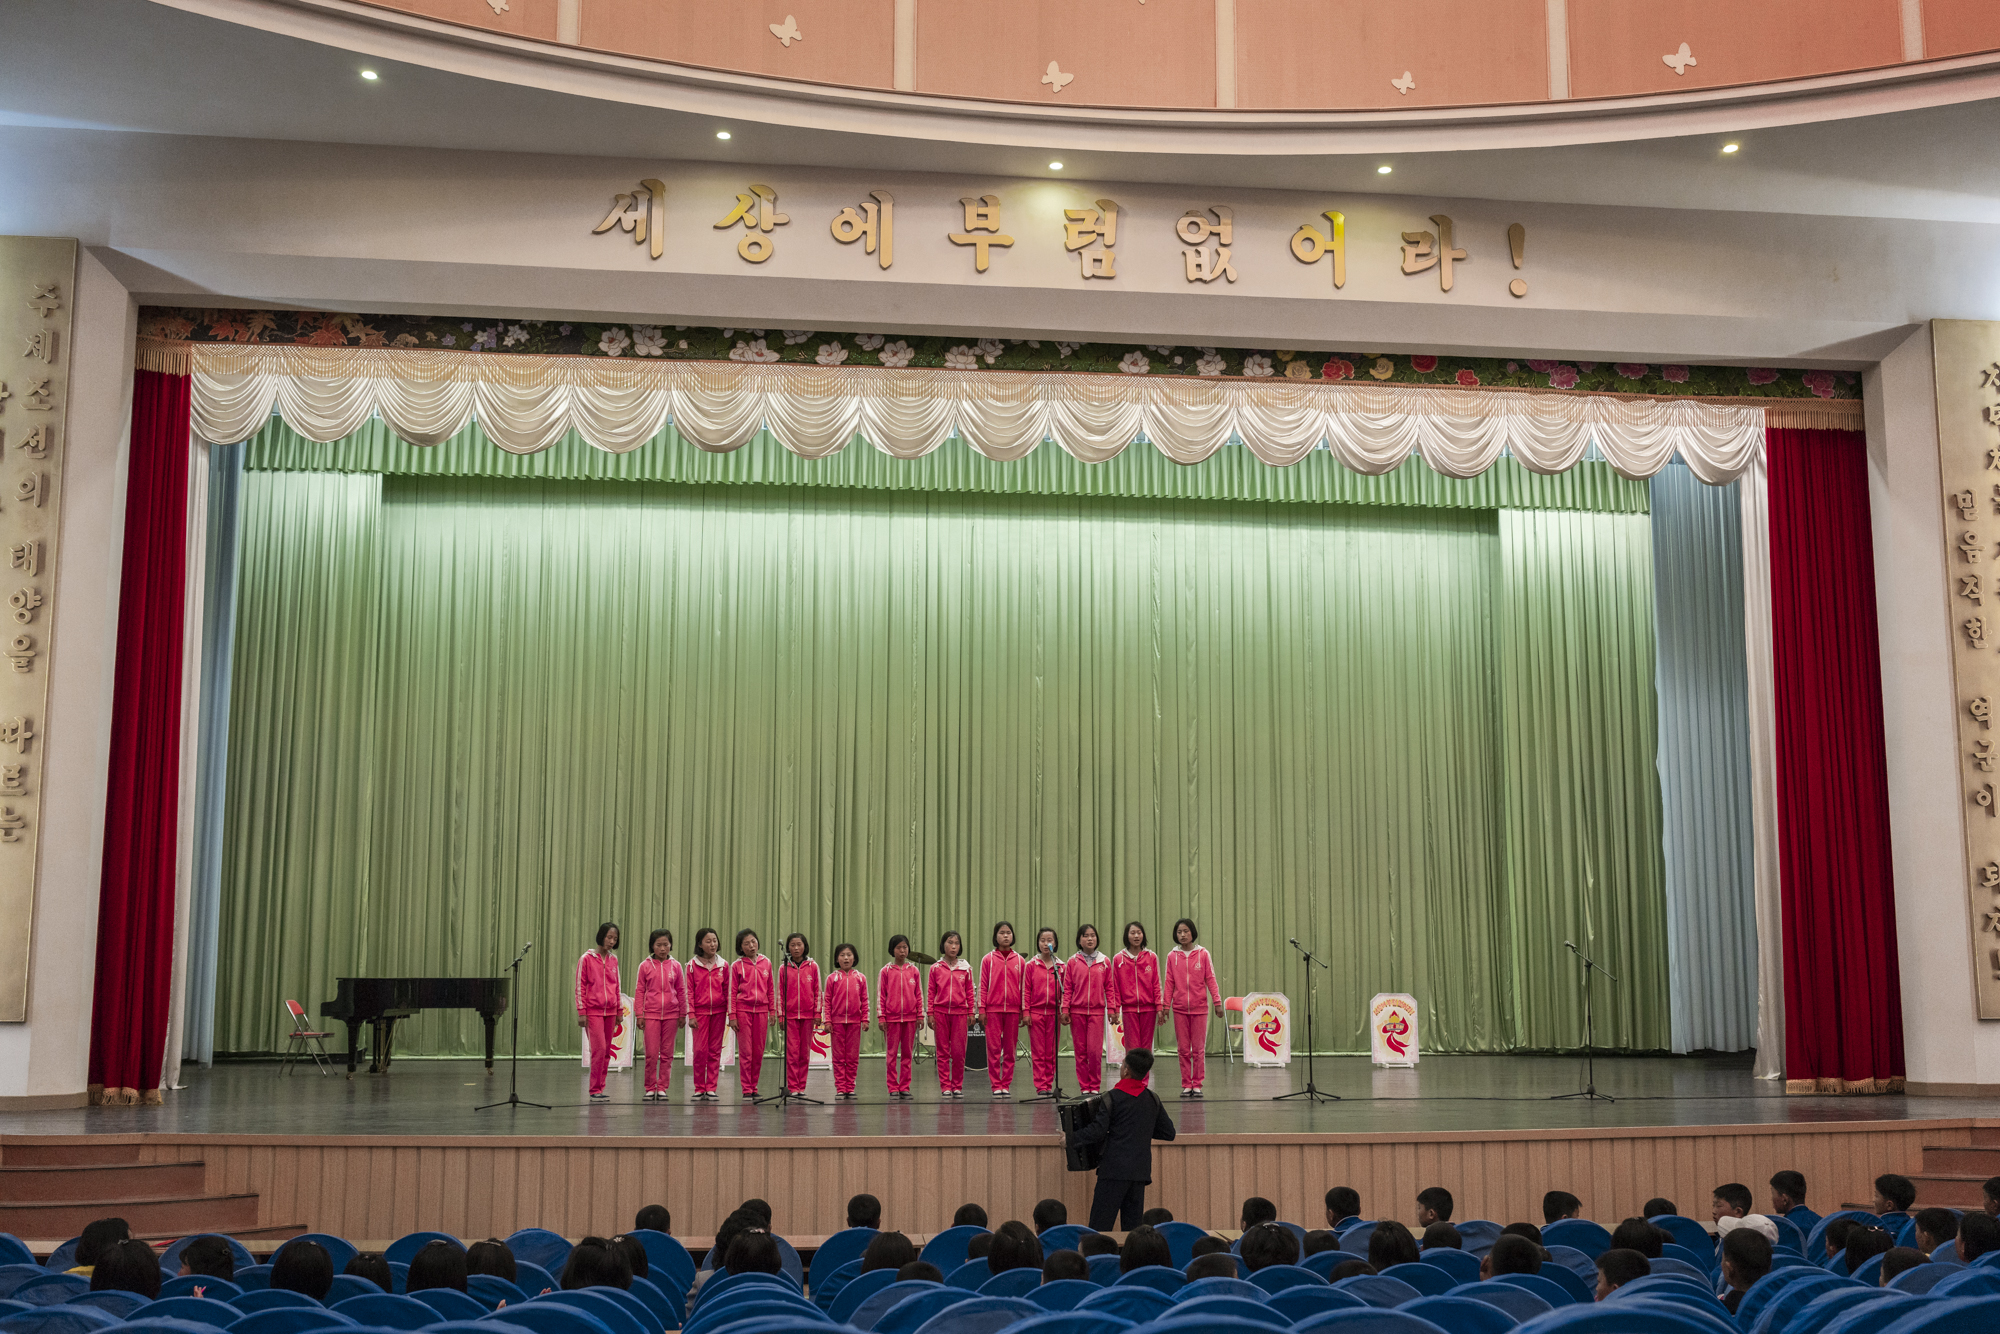  As part of the cultural exchange, students of the Songdowon International Children’s Camp learn how to perform North Korean songs and dances. 